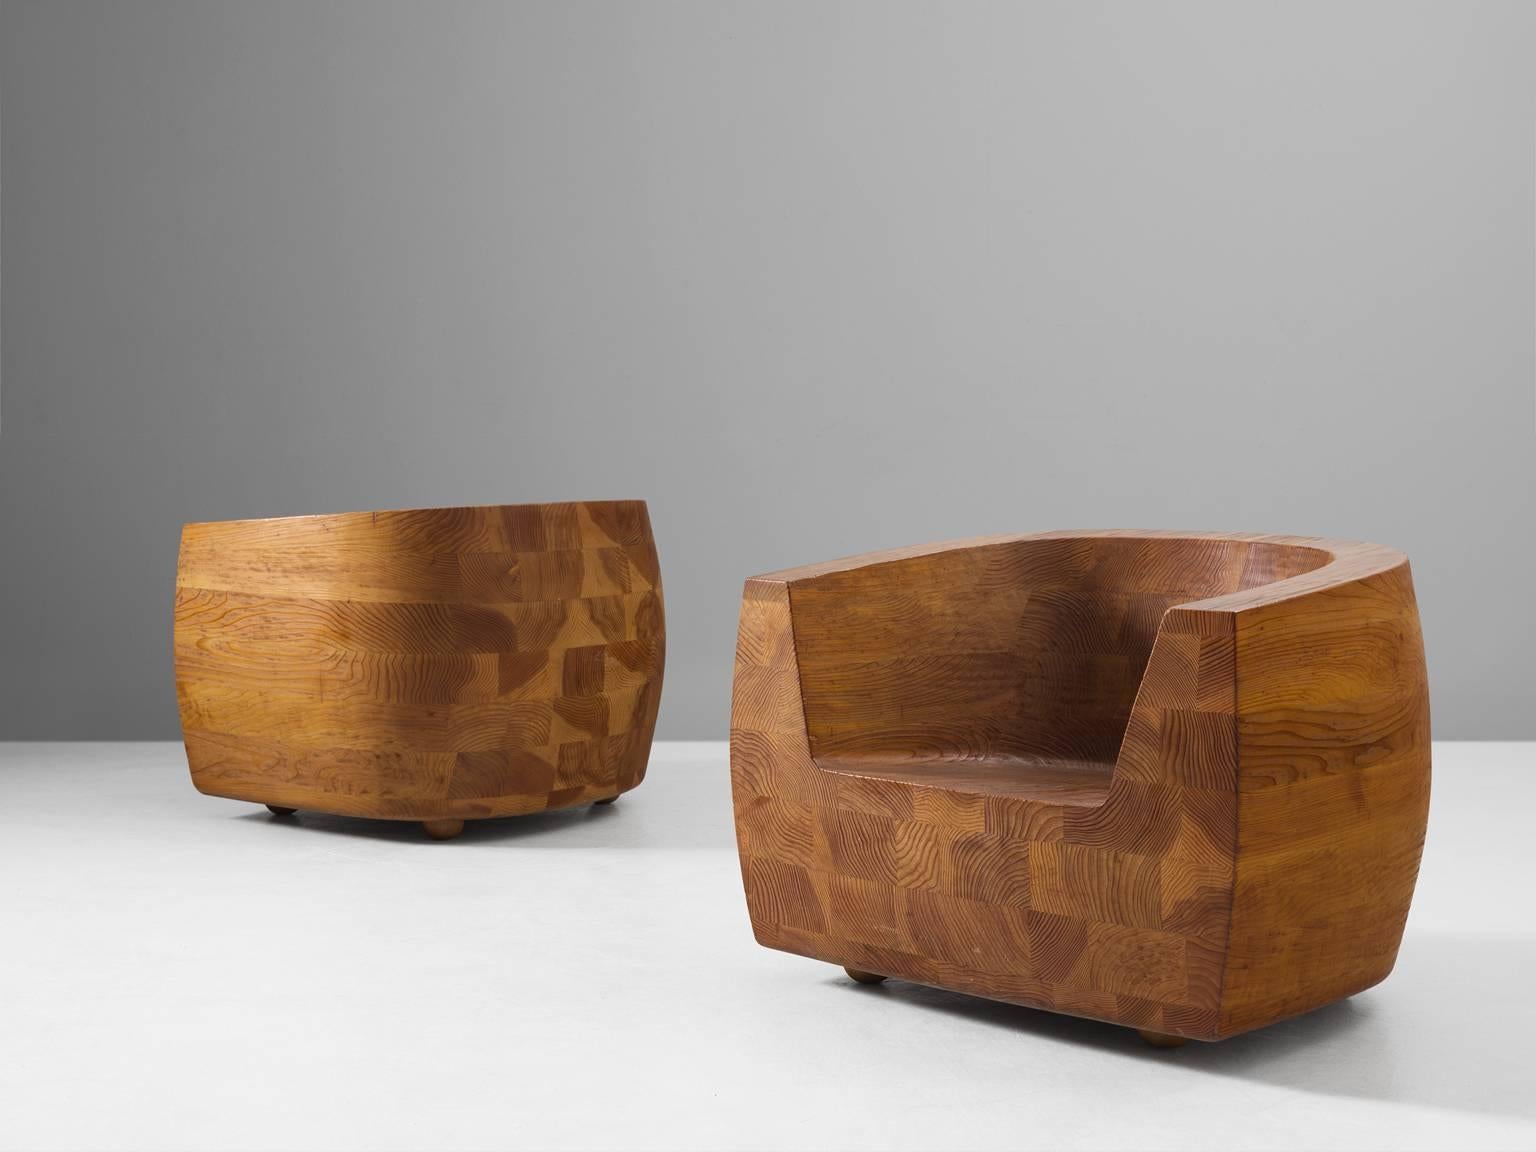 Isamo Kenmochi for Tendo, Kashiwado chairs, cedar, Japan, 1961. 

The rare vintage editions of the 'Kashiwado' armchairs were specially designed for the famous Sumo wrestler Kashiwado Tsuyoshi. Highly rare to find as a vintage pair in this